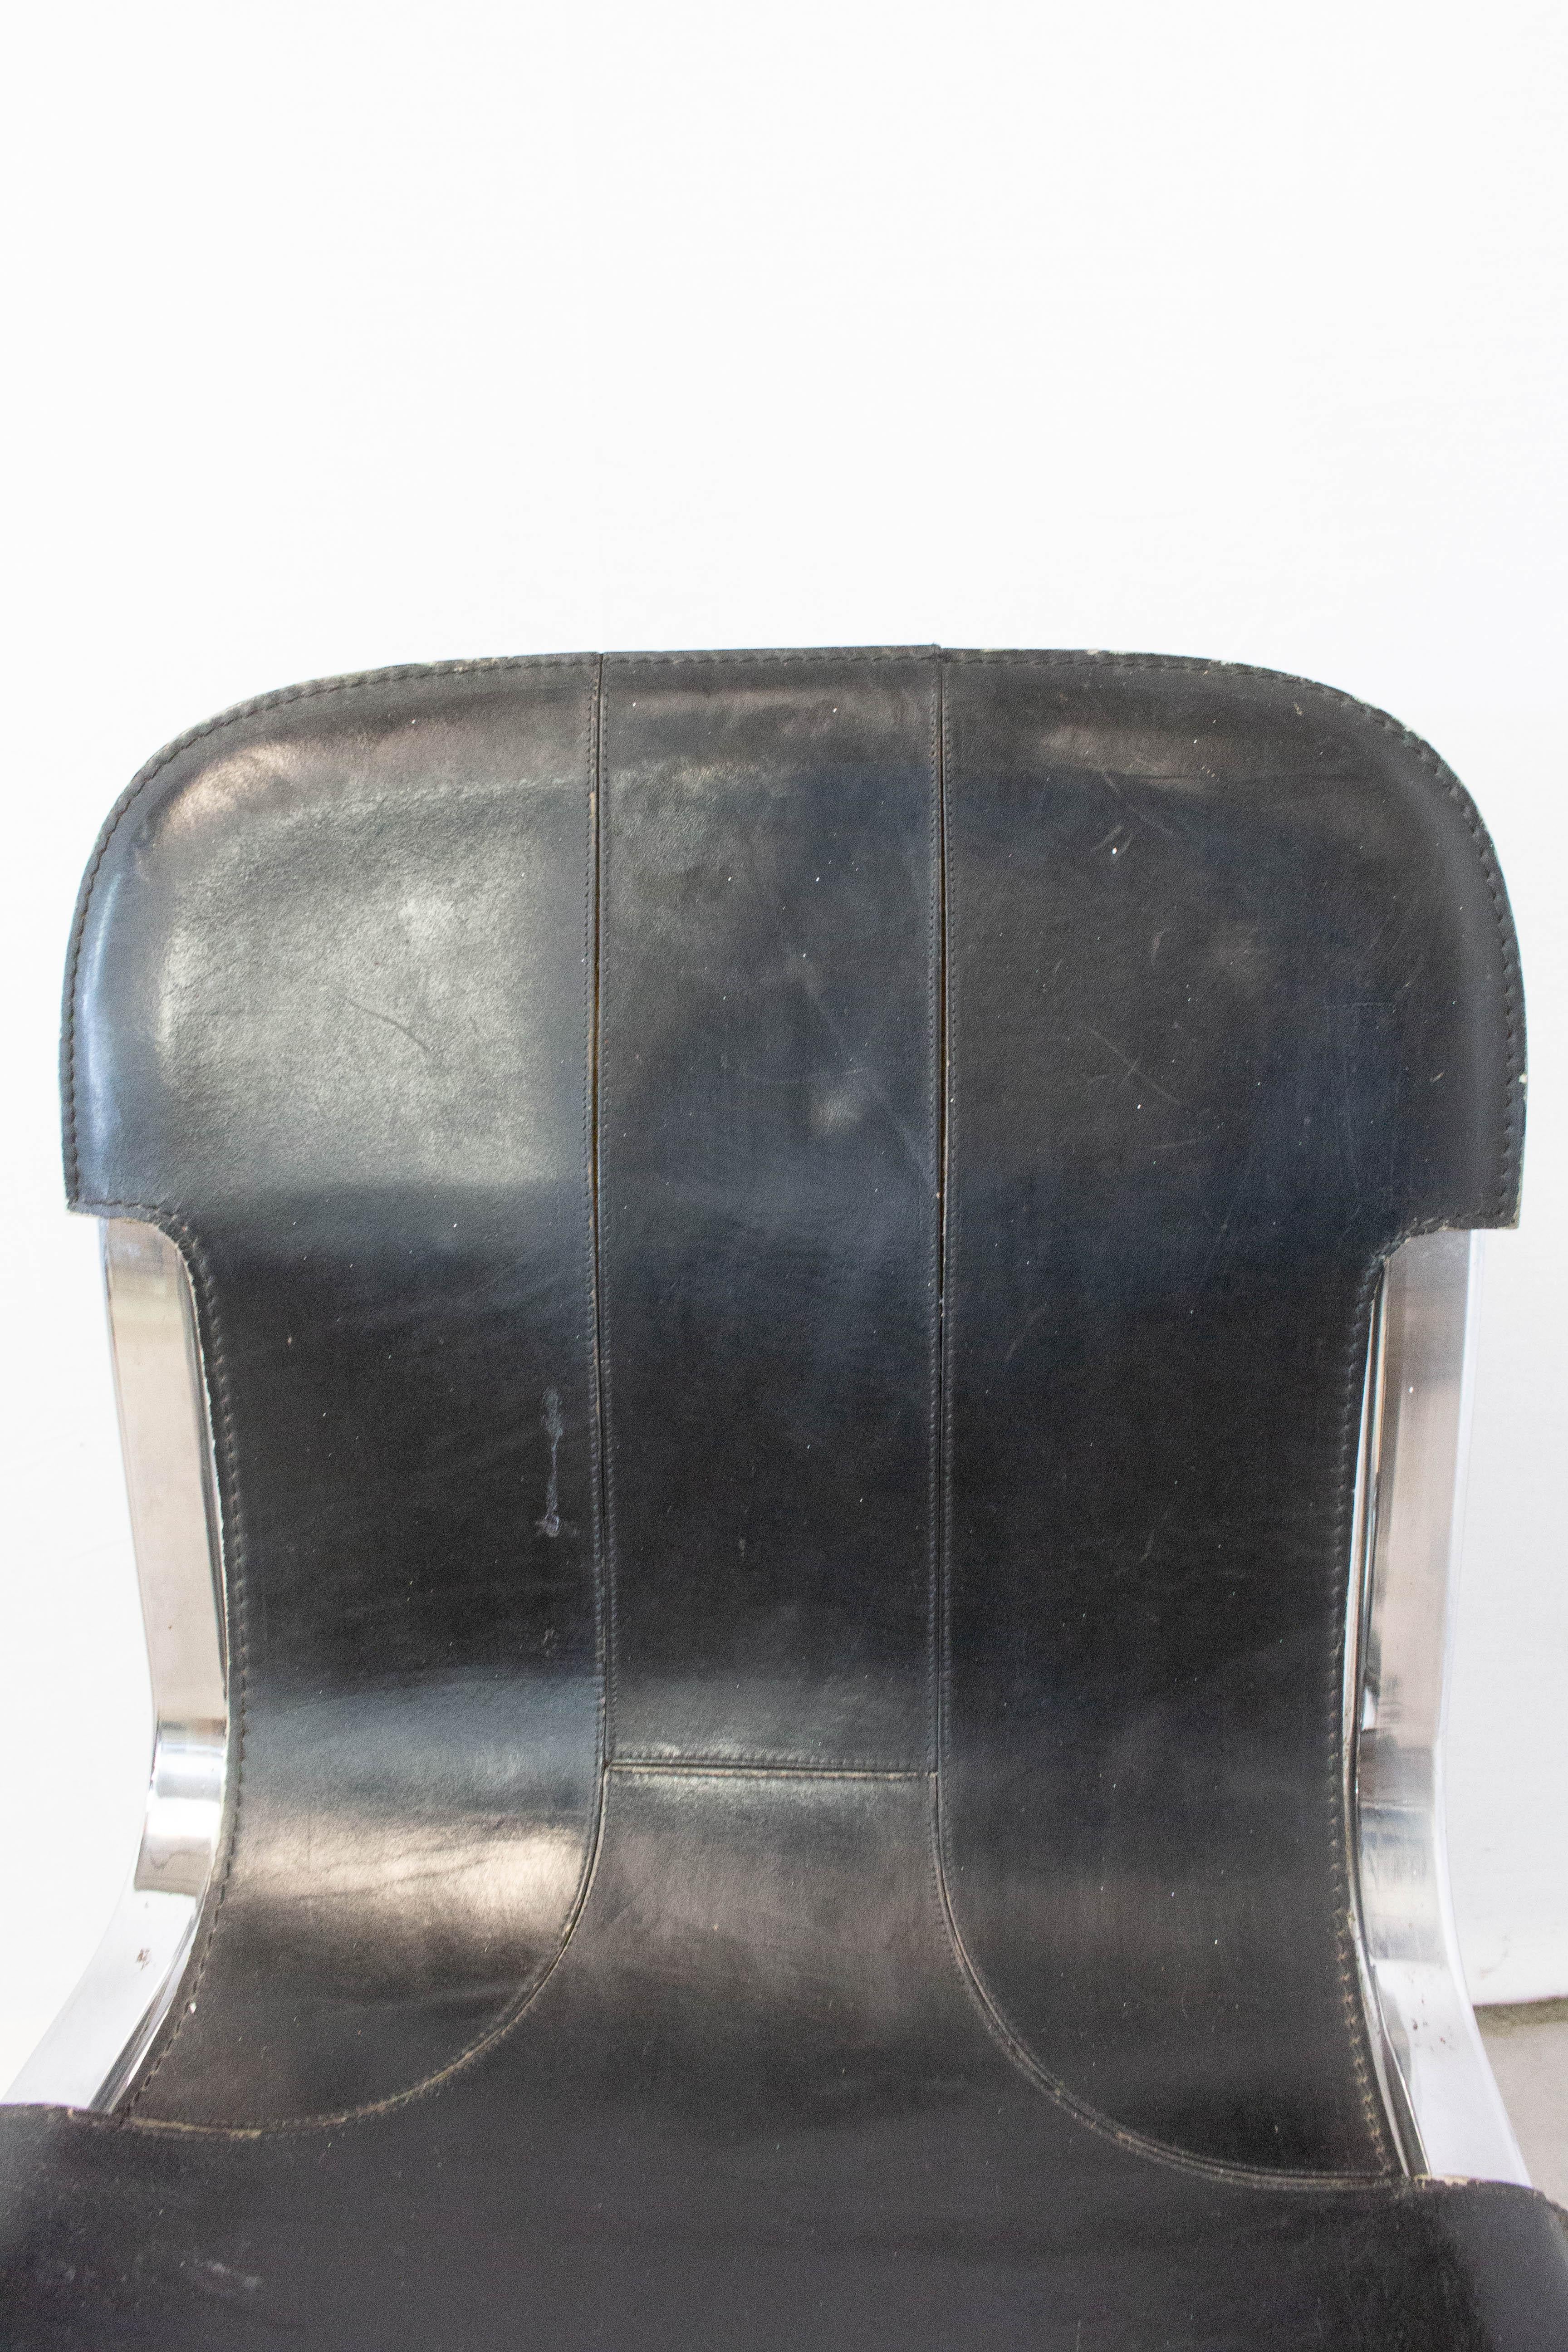 20th Century Chair Willy Rizzo Black Leather Chrome N2, circa 1970